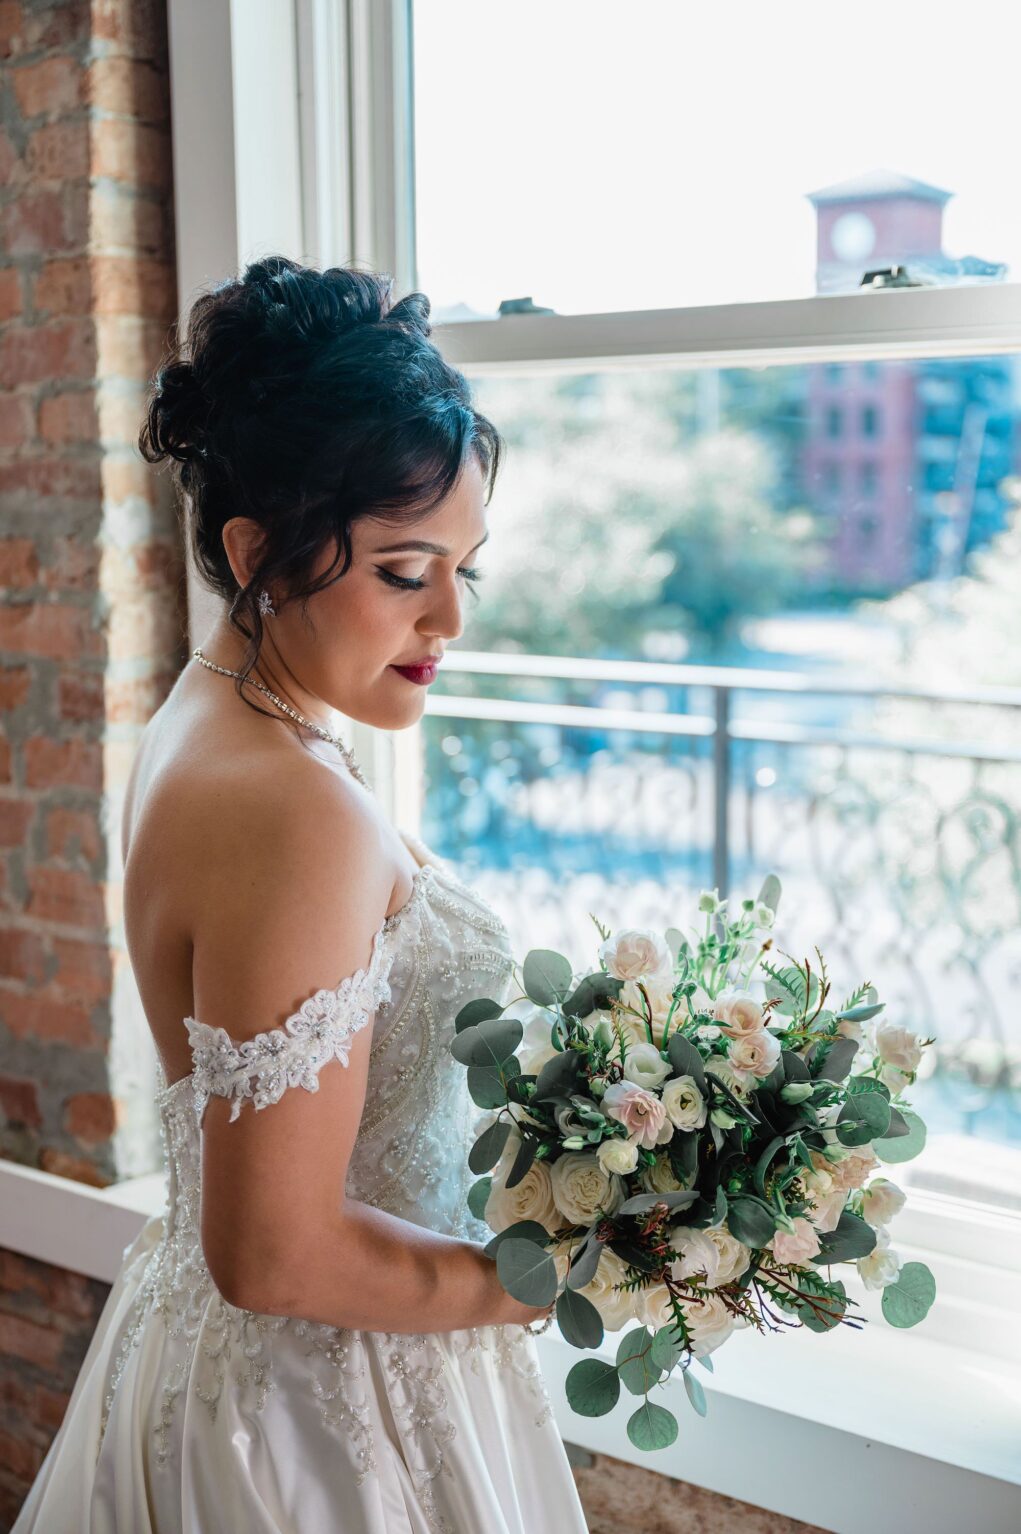 Bridal Updo Wedding Hair | White and Pink Garden Rose, Peony, with Eucalyptus Greenery Bouquet | Lace Flower Applique Removable Straps | Tampa Bay Hair and Makeup Artist Femme Akoi Beauty Studio | Florist Save the Date Florida | Boutique Truly Forever Bridal